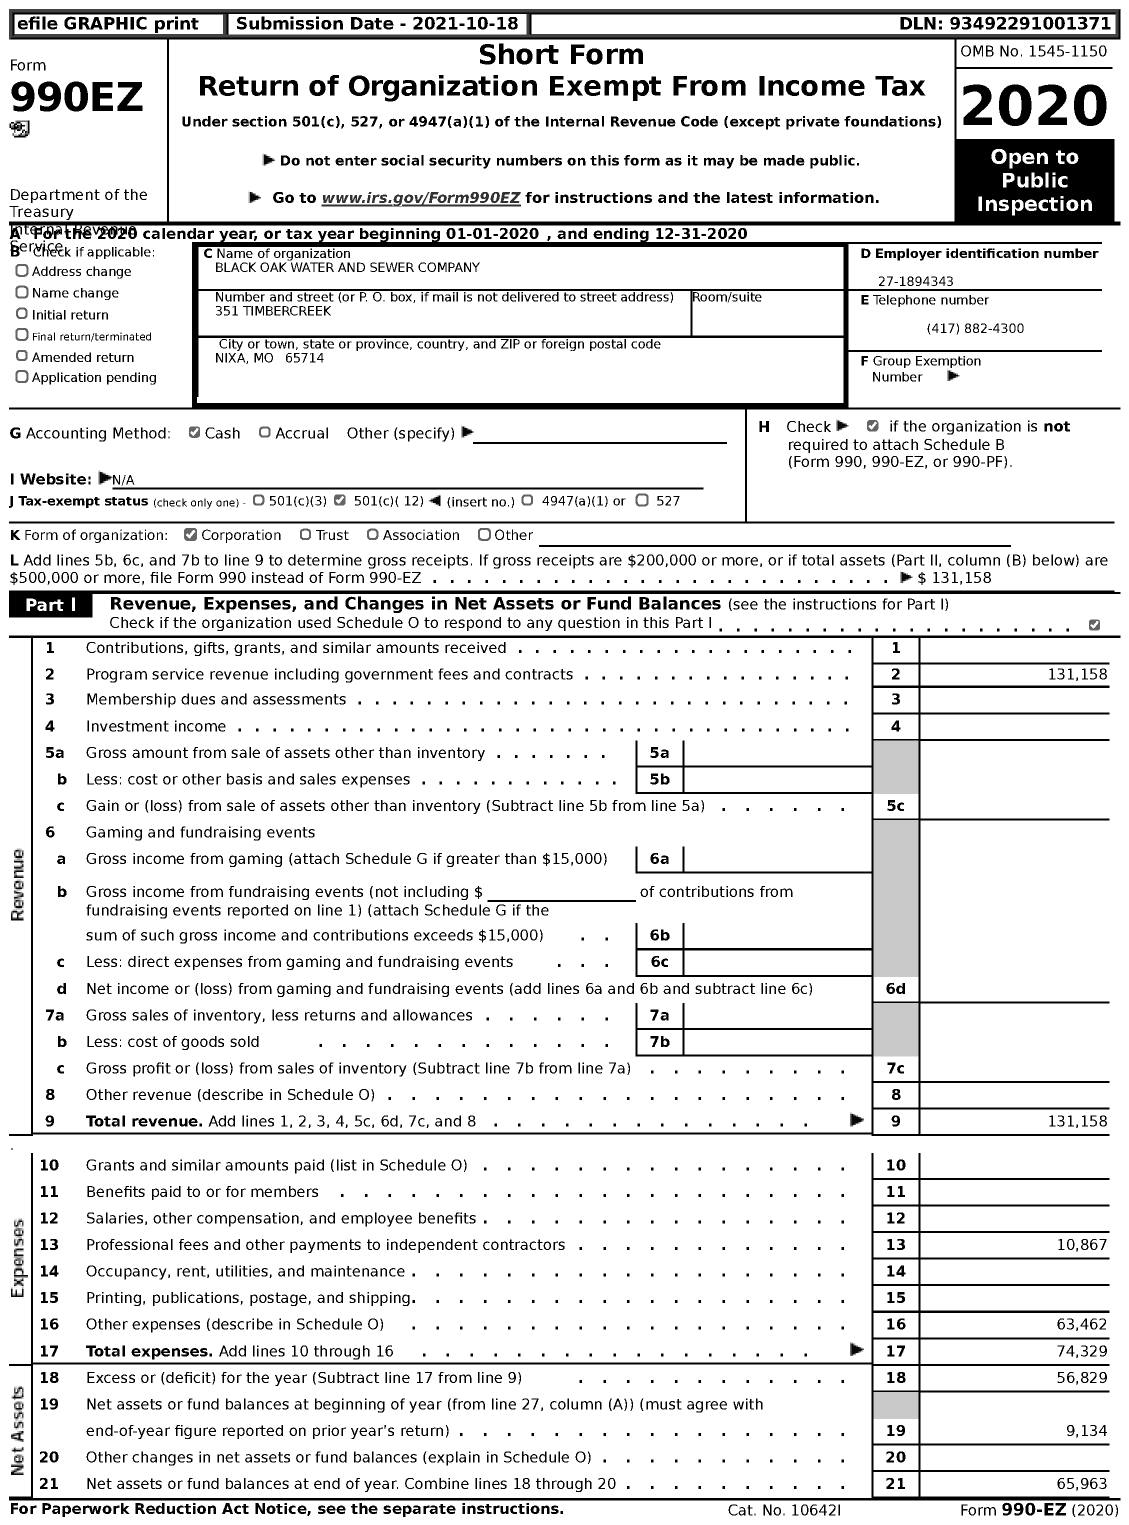 Image of first page of 2020 Form 990EZ for Black Oak Water and Sewer Company